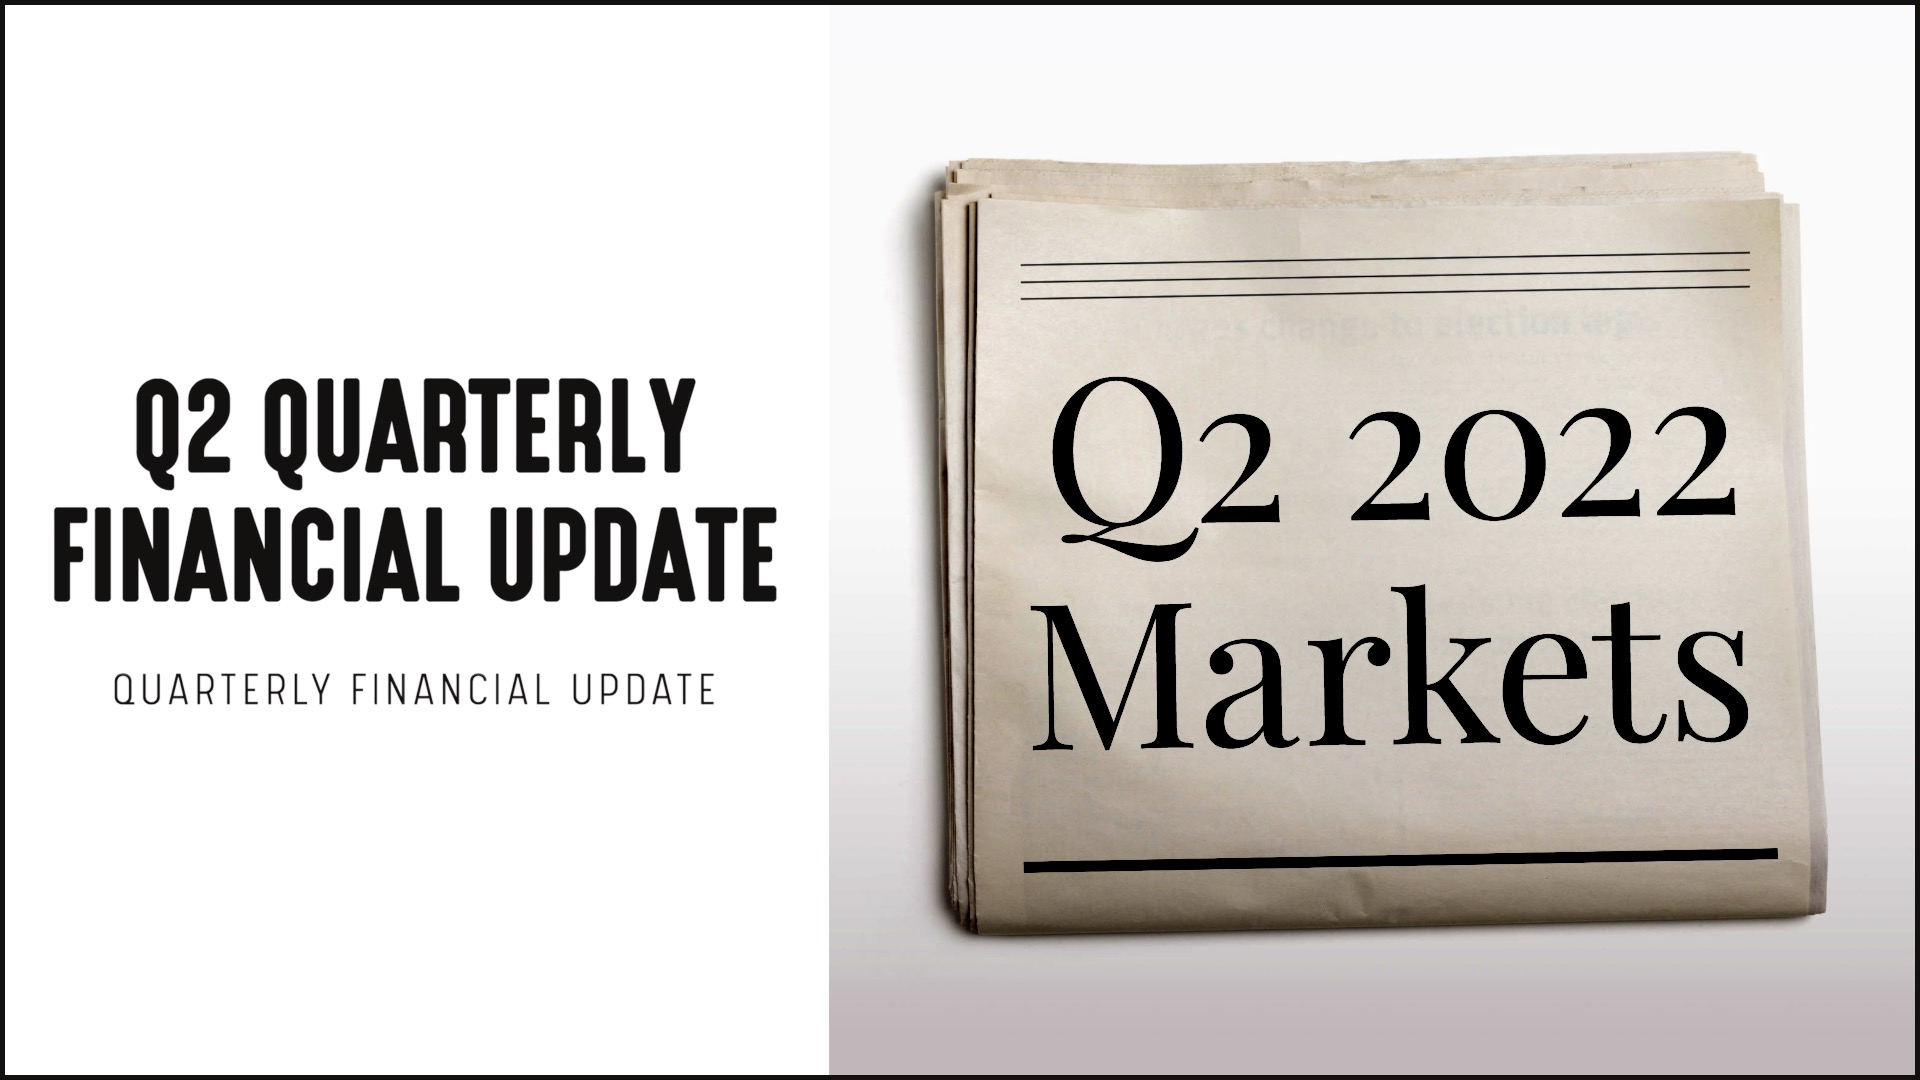 [NEW] Q2 2022 Financial Update Campaign